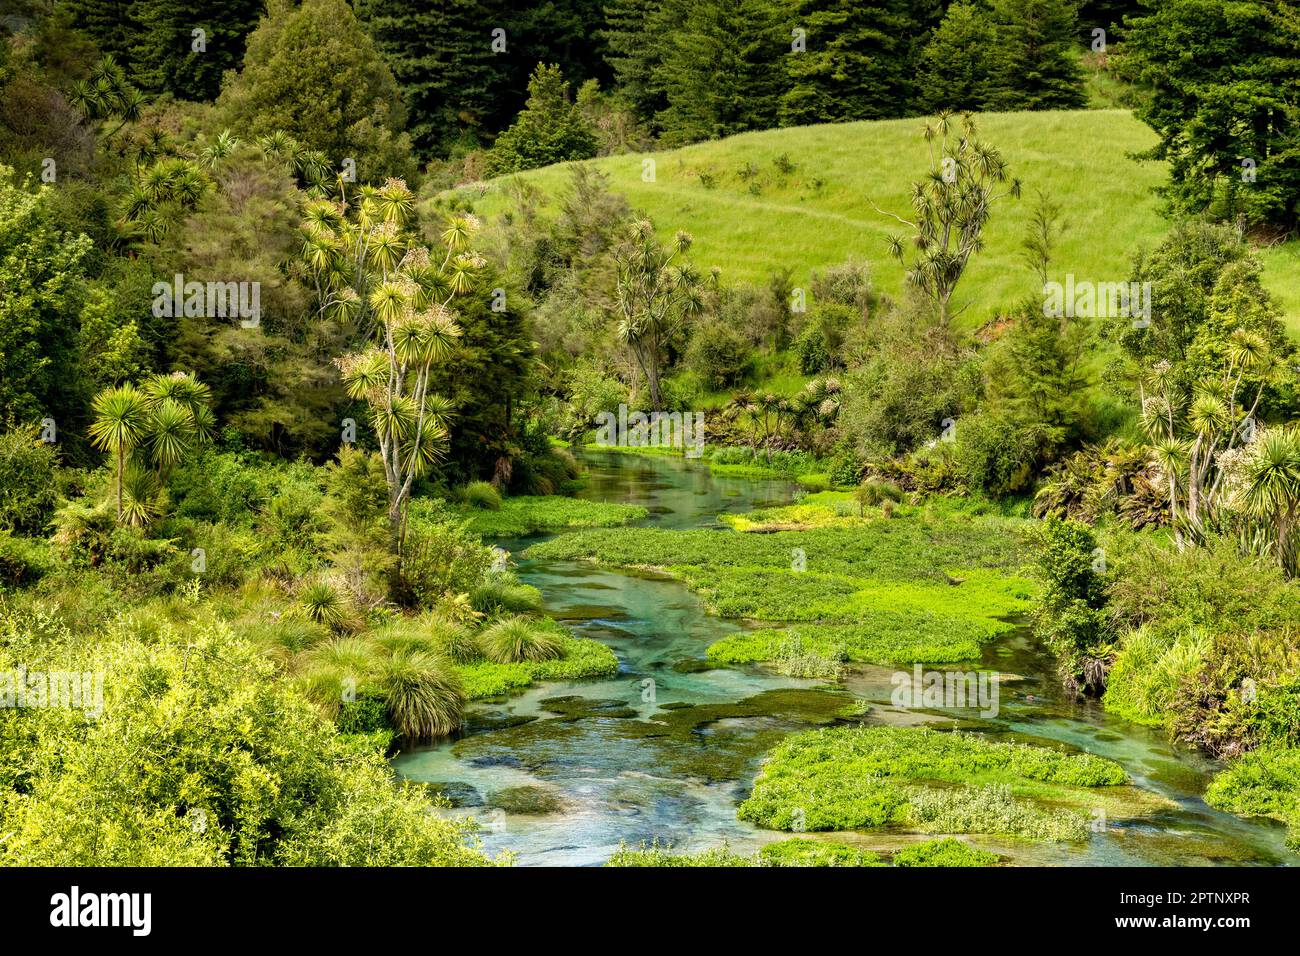 The Blue Spring in the Waikato Region of the North Island of New Zealand Stock Photo